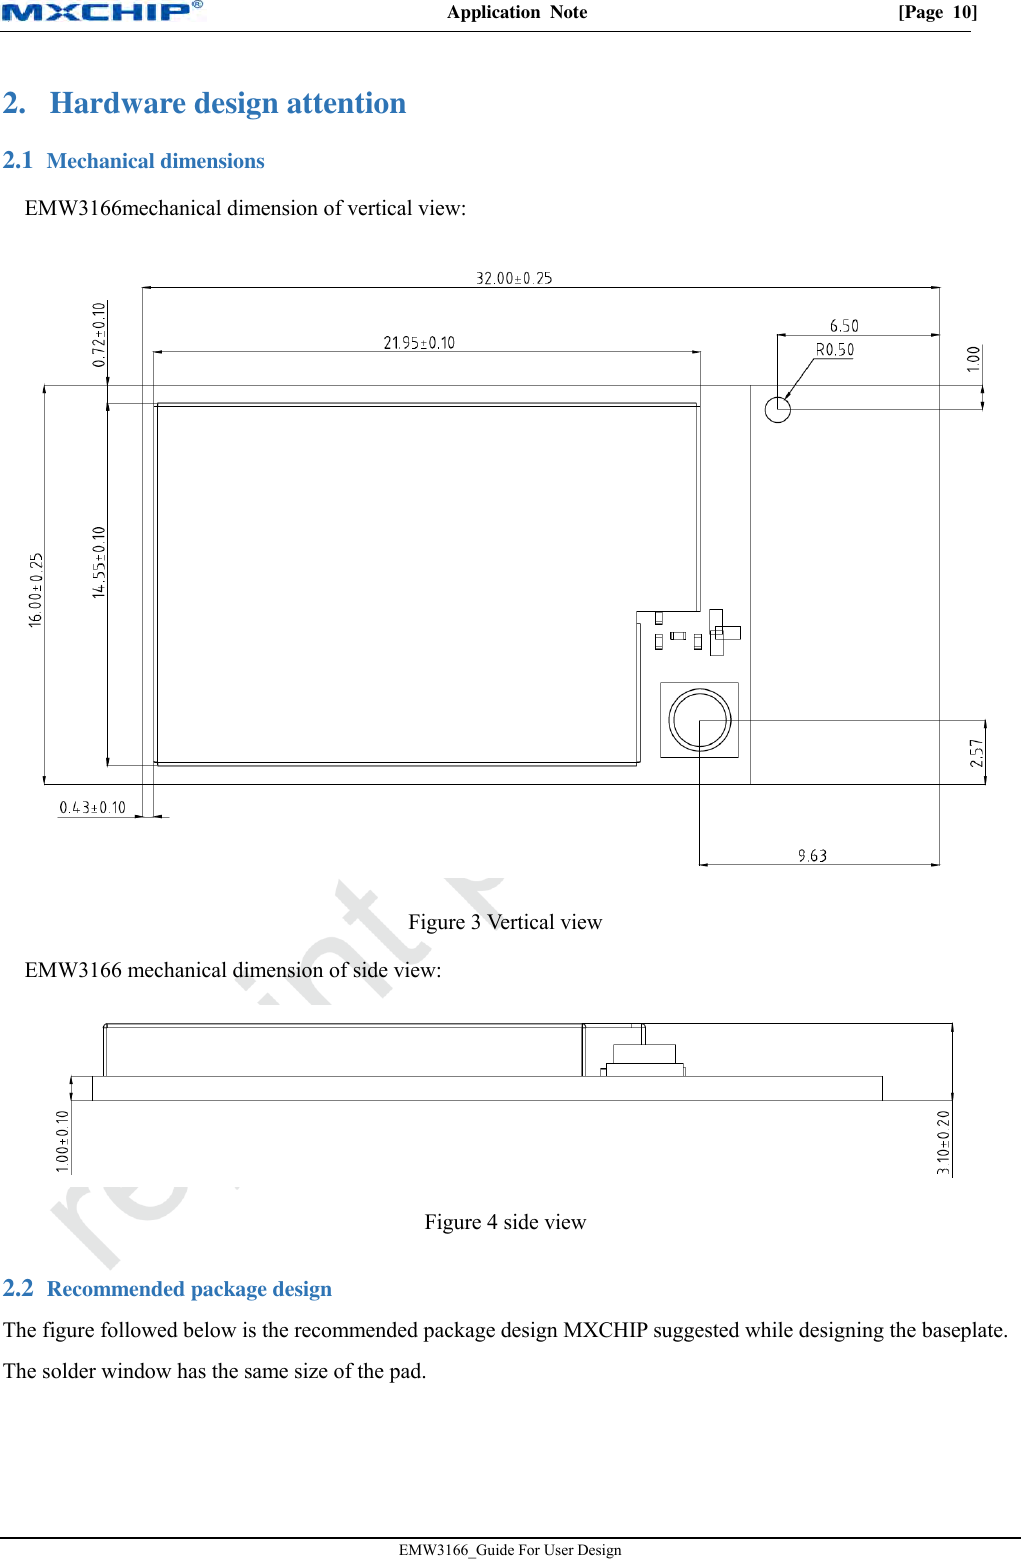 Application  Note  [Page  10] EMW3166_Guide For User Design 2. Hardware design attention Mechanical dimensions 2.1EMW3166mechanical dimension of vertical view: Figure 3 Vertical view EMW3166 mechanical dimension of side view: Figure 4 side view  Recommended package design 2.2The figure followed below is the recommended package design MXCHIP suggested while designing the baseplate. The solder window has the same size of the pad. 